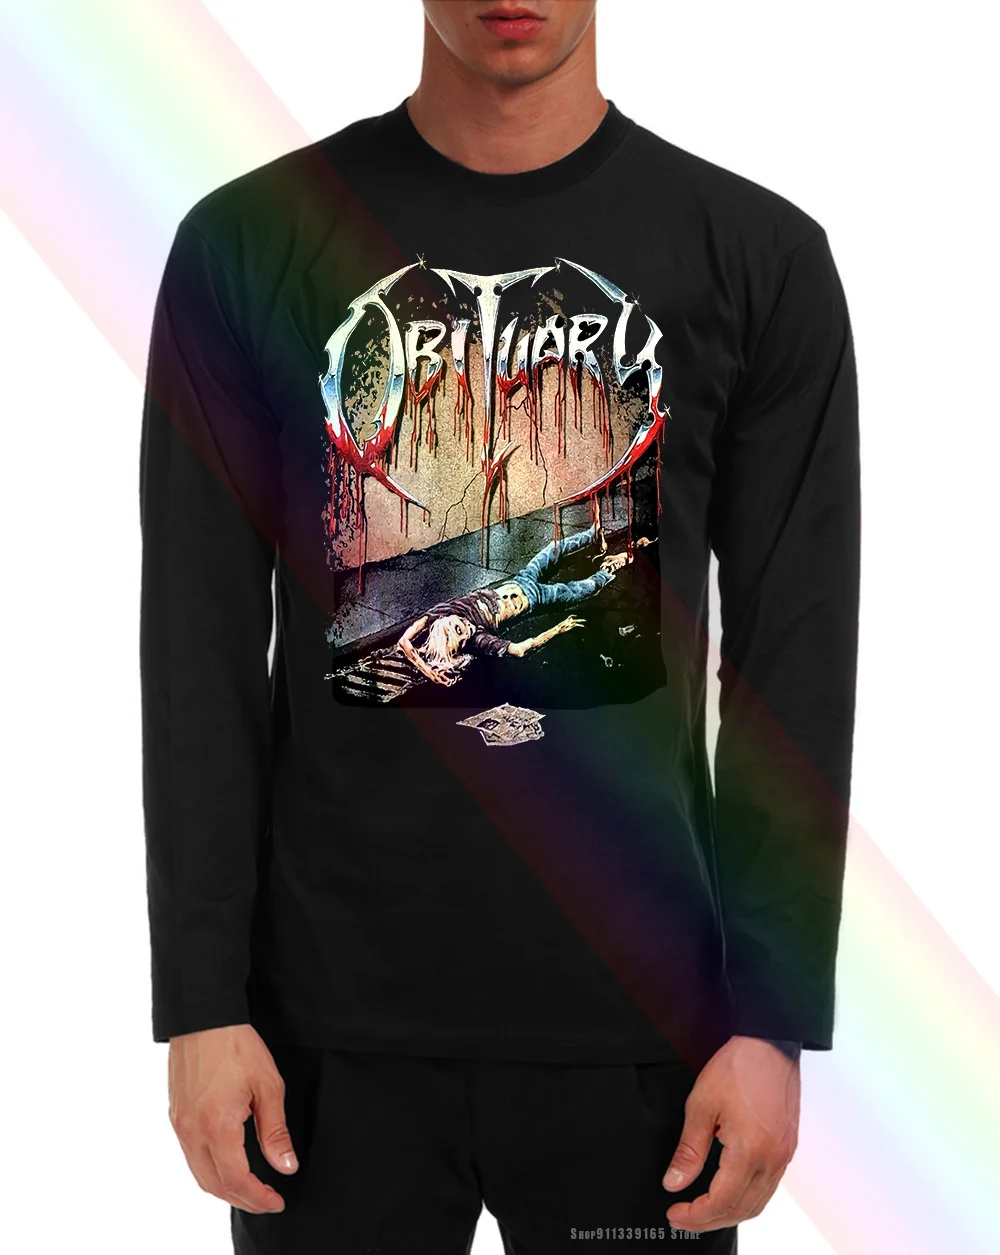 

Obituary Slowly We Rot American Death Metal Band Long Sleeve T-Shirt Sizes S To 6Xl